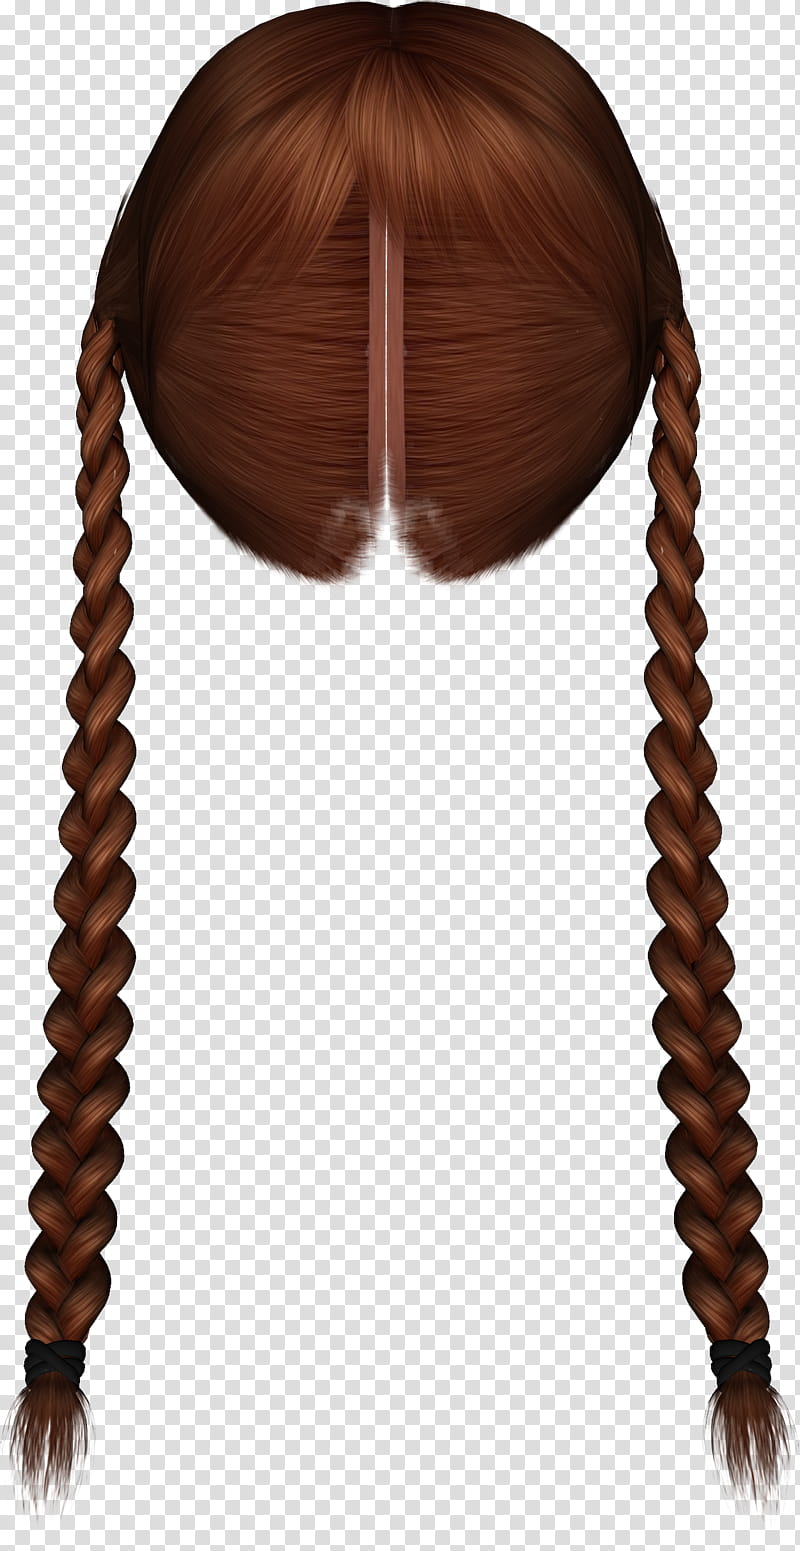 Hairstylez , brown braided hair illustration transparent background PNG clipart